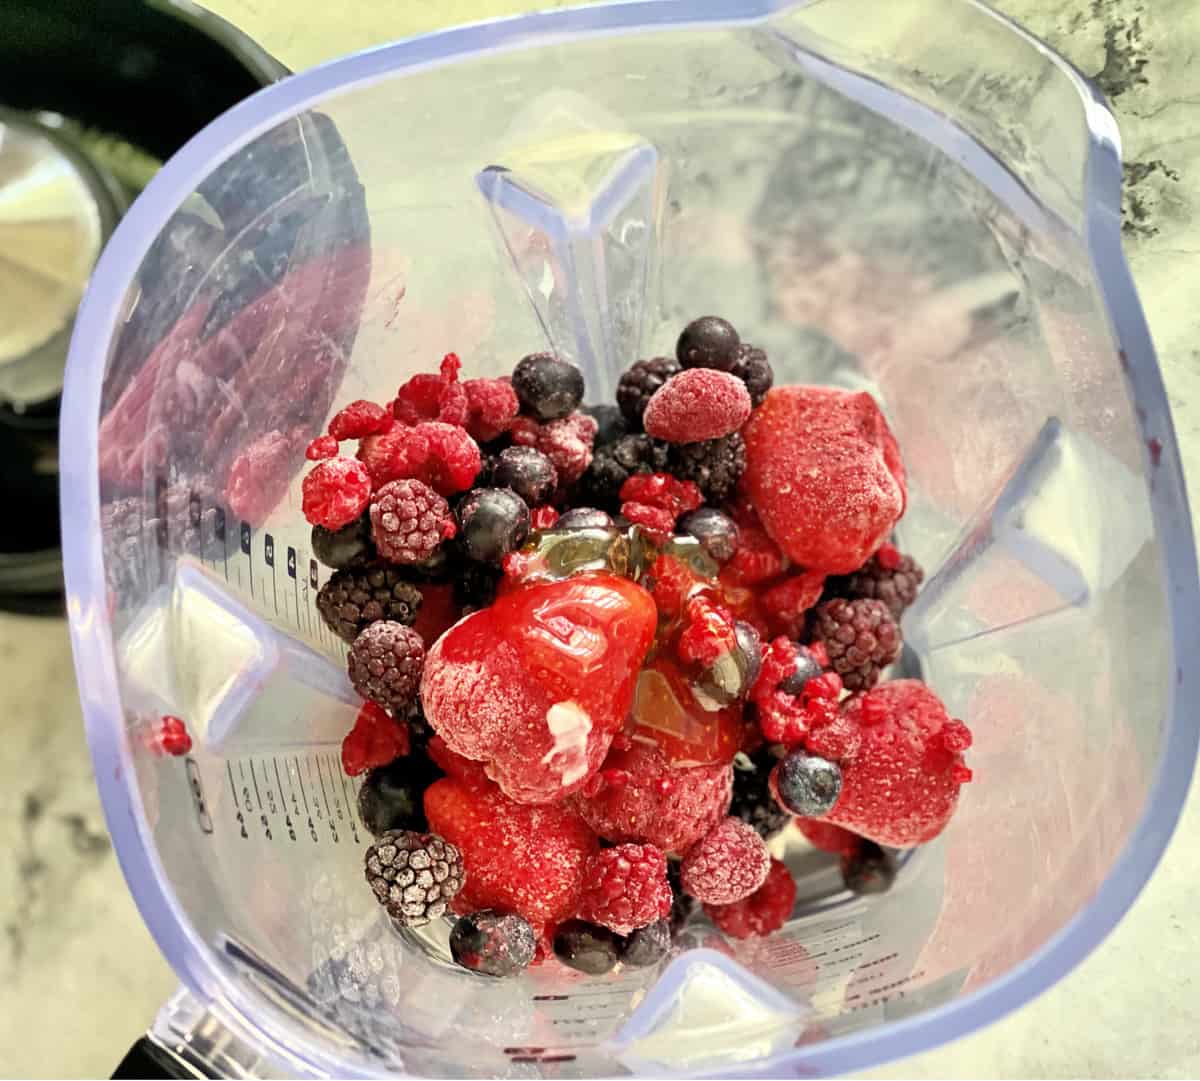 Top view of an open blender filled with frozen berries and honey.